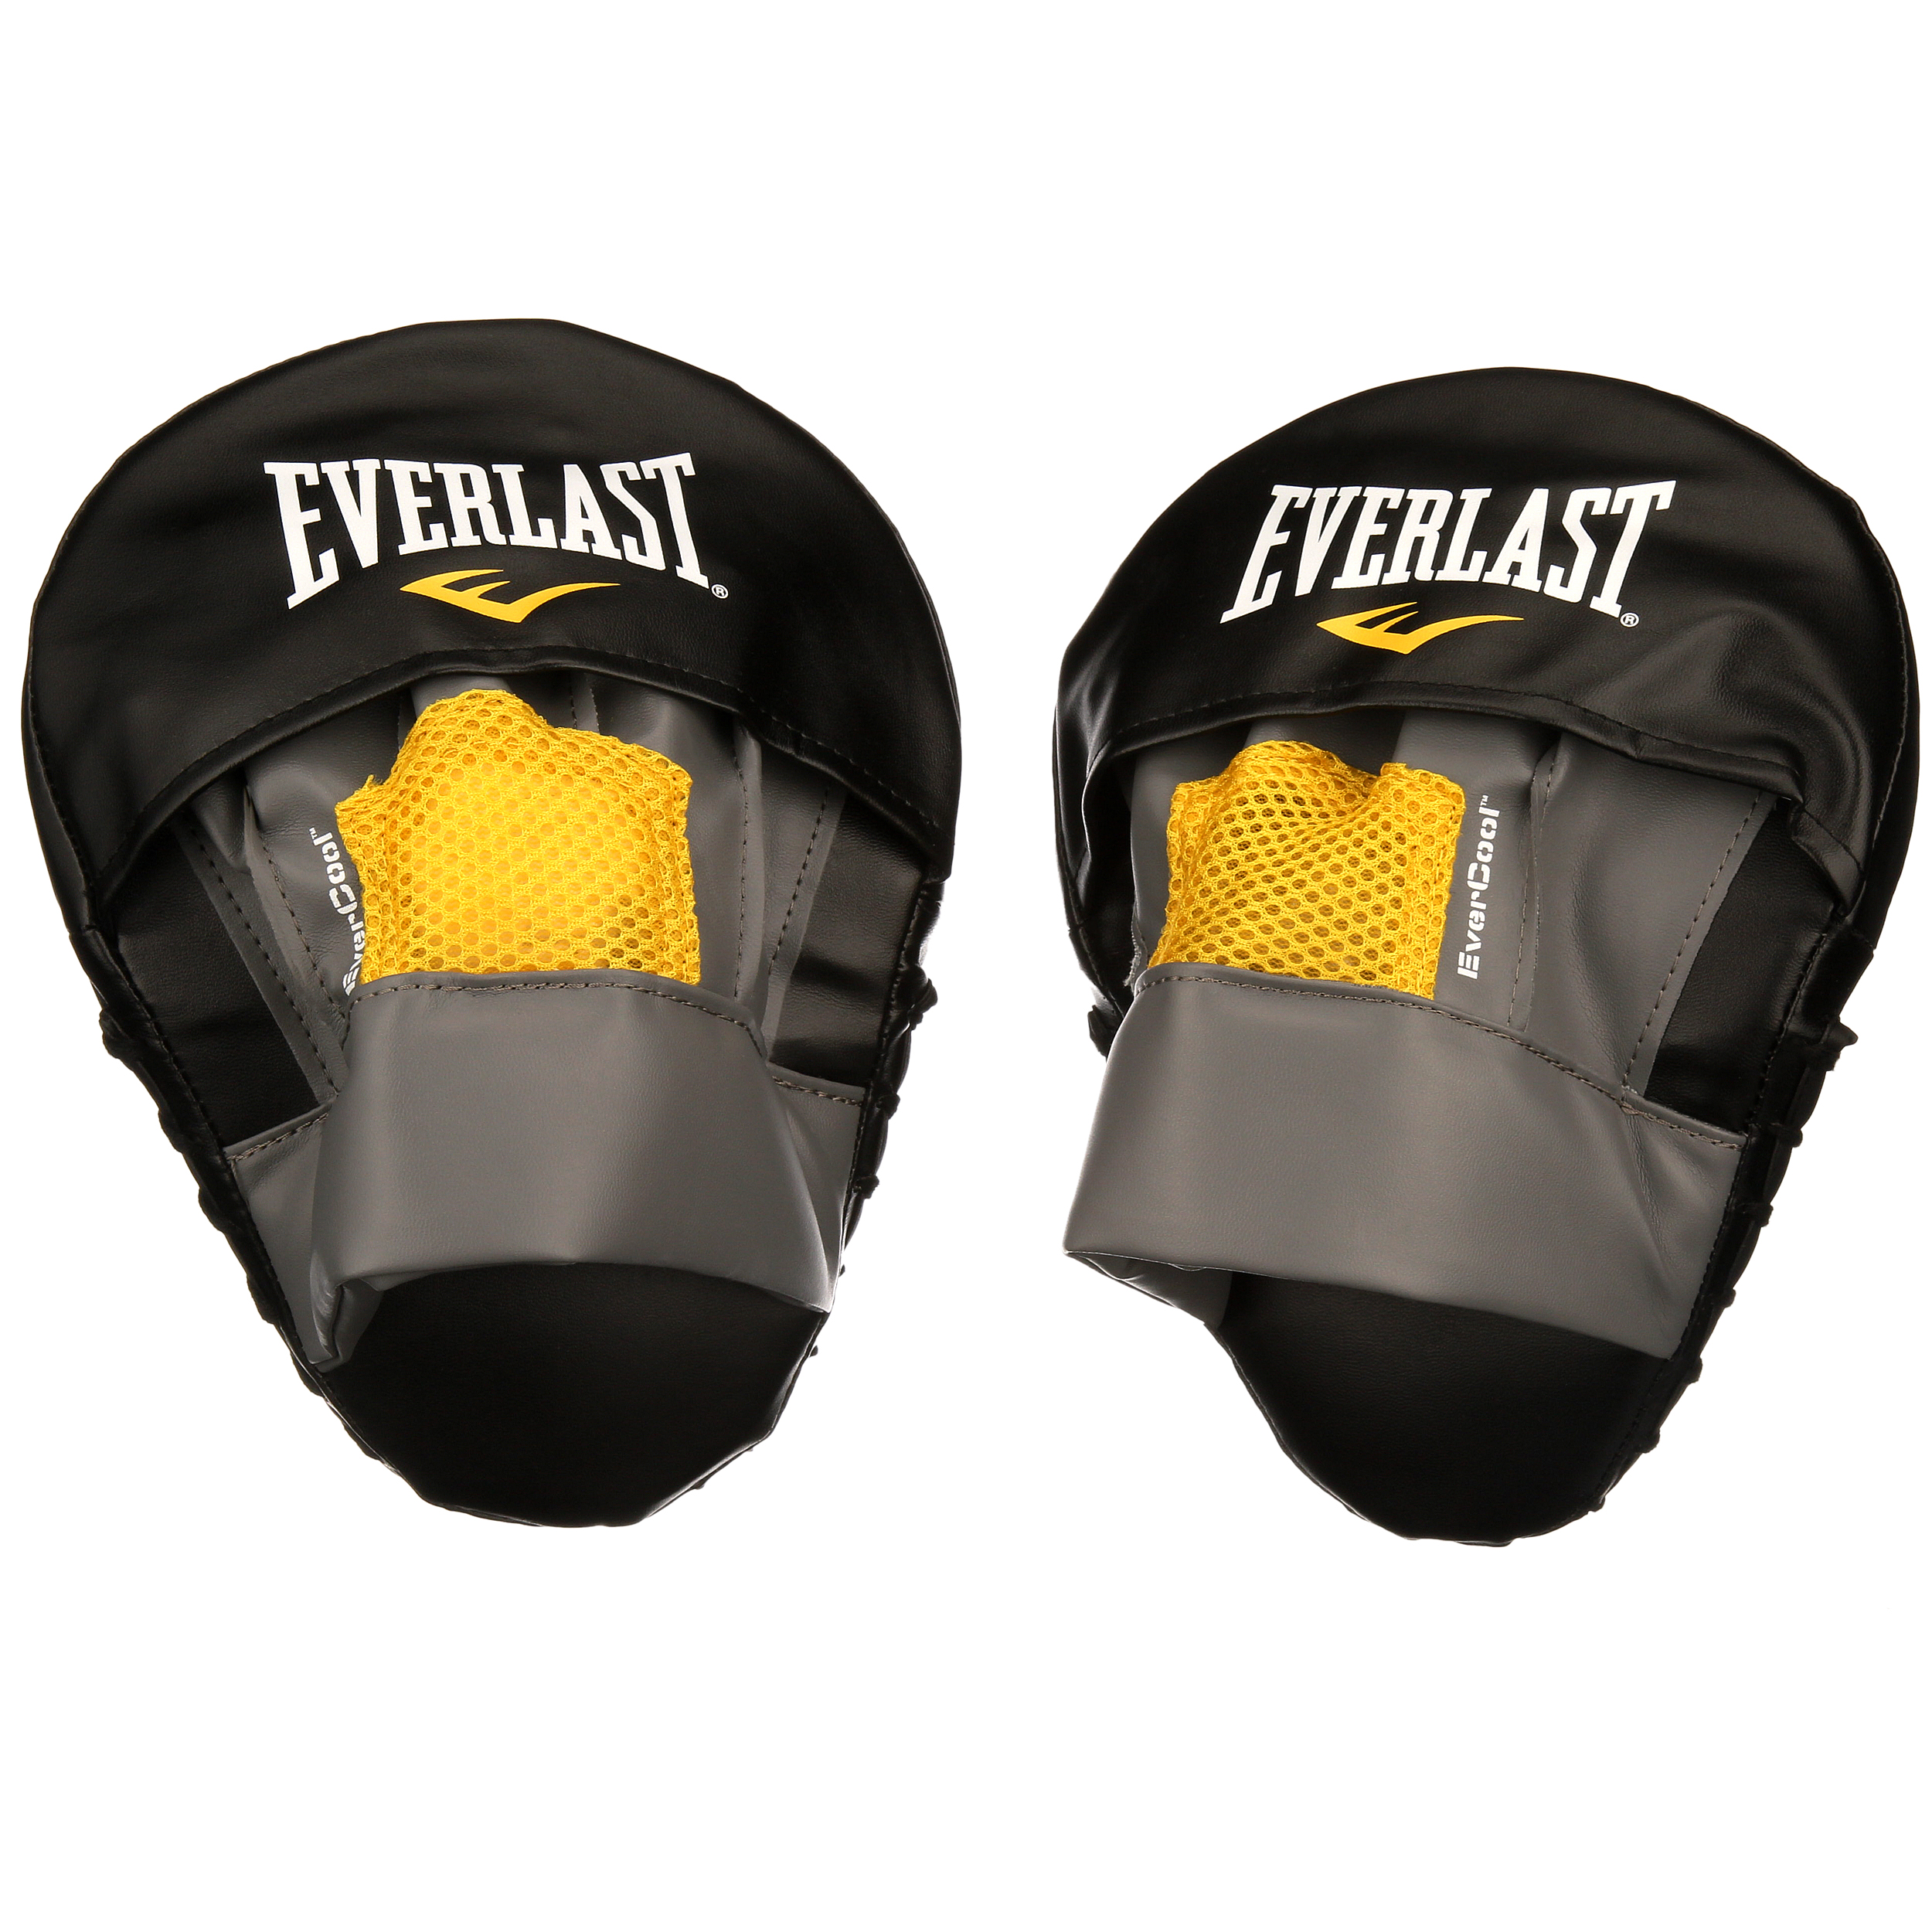 Everlast Mantis Punch Mitts, One Size - image 5 of 6